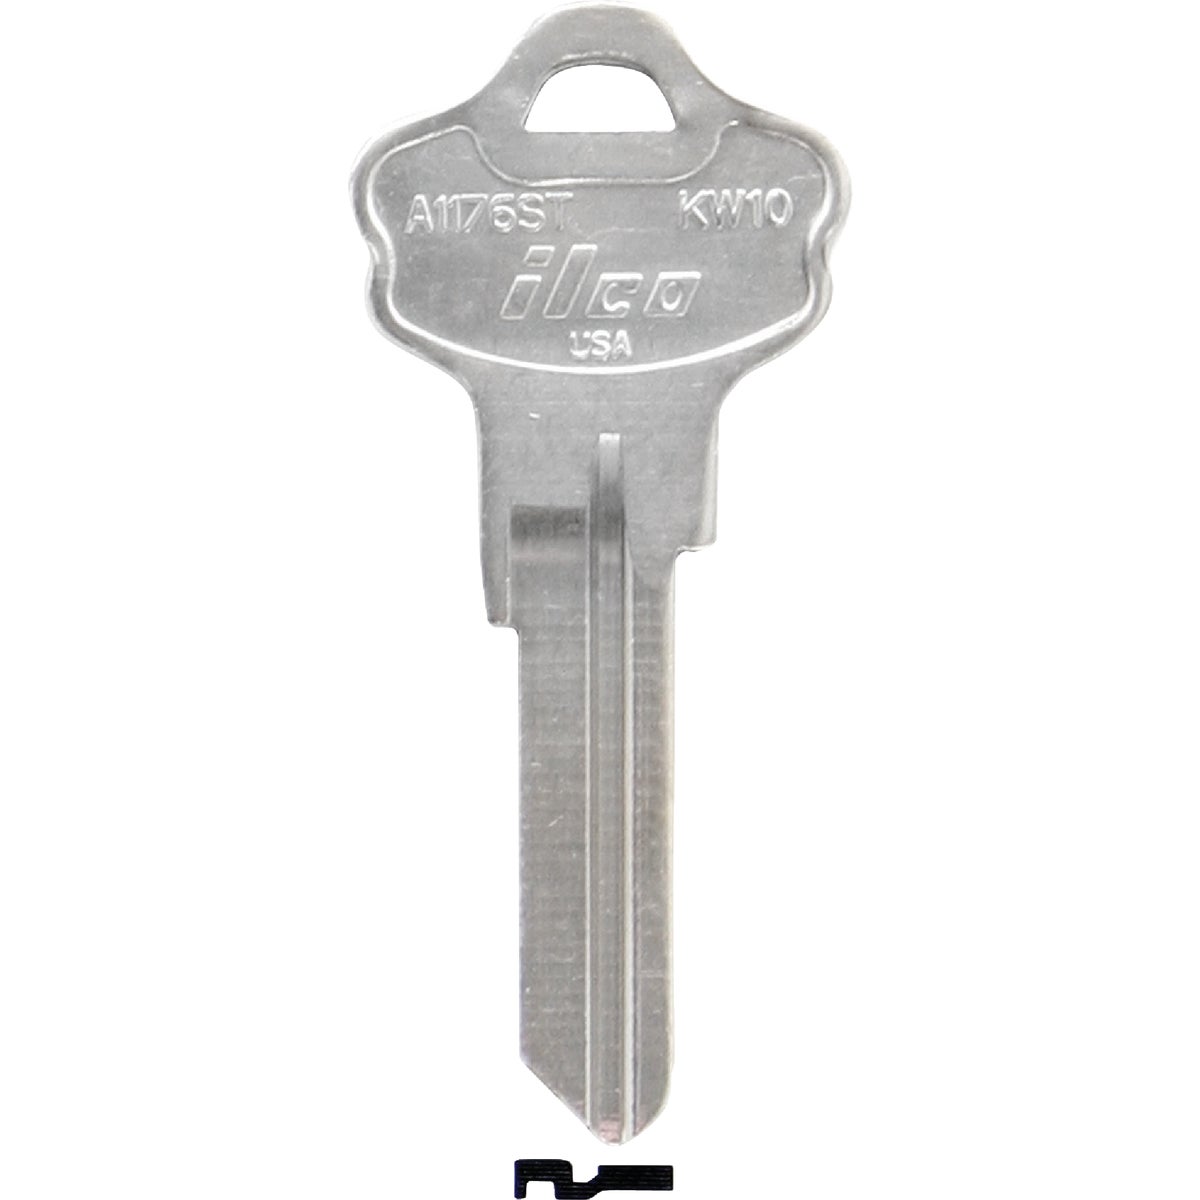 Item 235474, Nickel-plated key blank. When you order one, you will receive 10 keys.